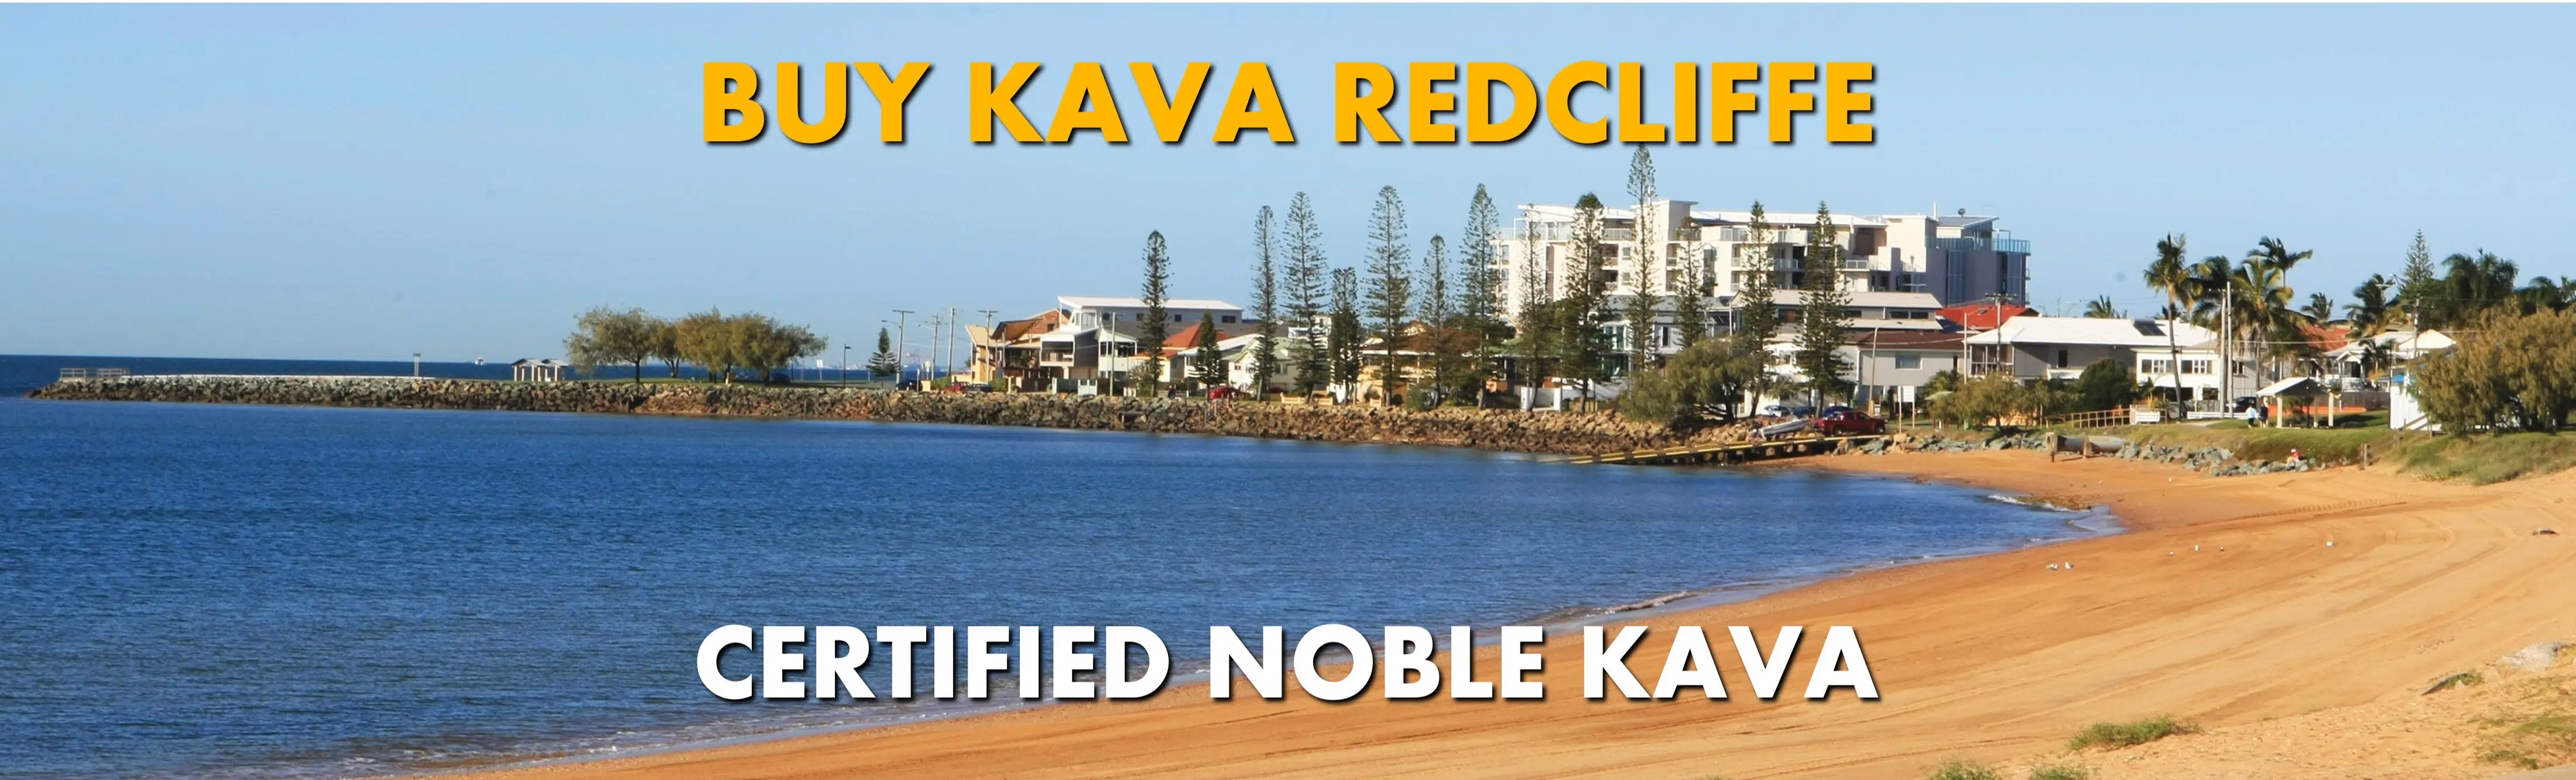 Beach scene in Redcliffe Queensland with caption Buy Kava in Redcliffe Certified Noble Kava